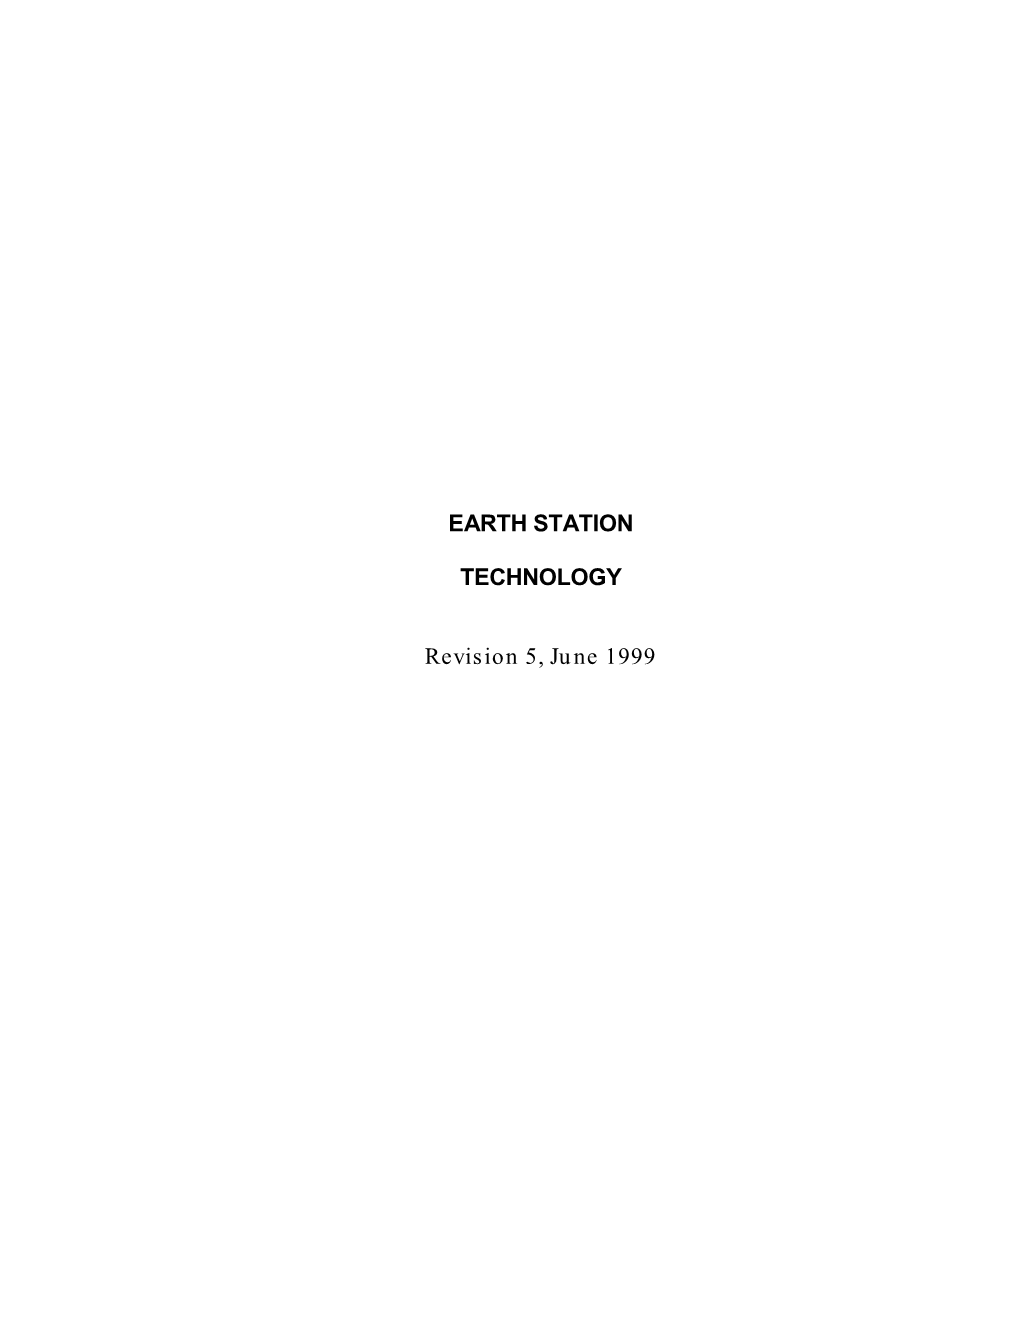 EARTH STATION TECHNOLOGY Revision 5, June 1999